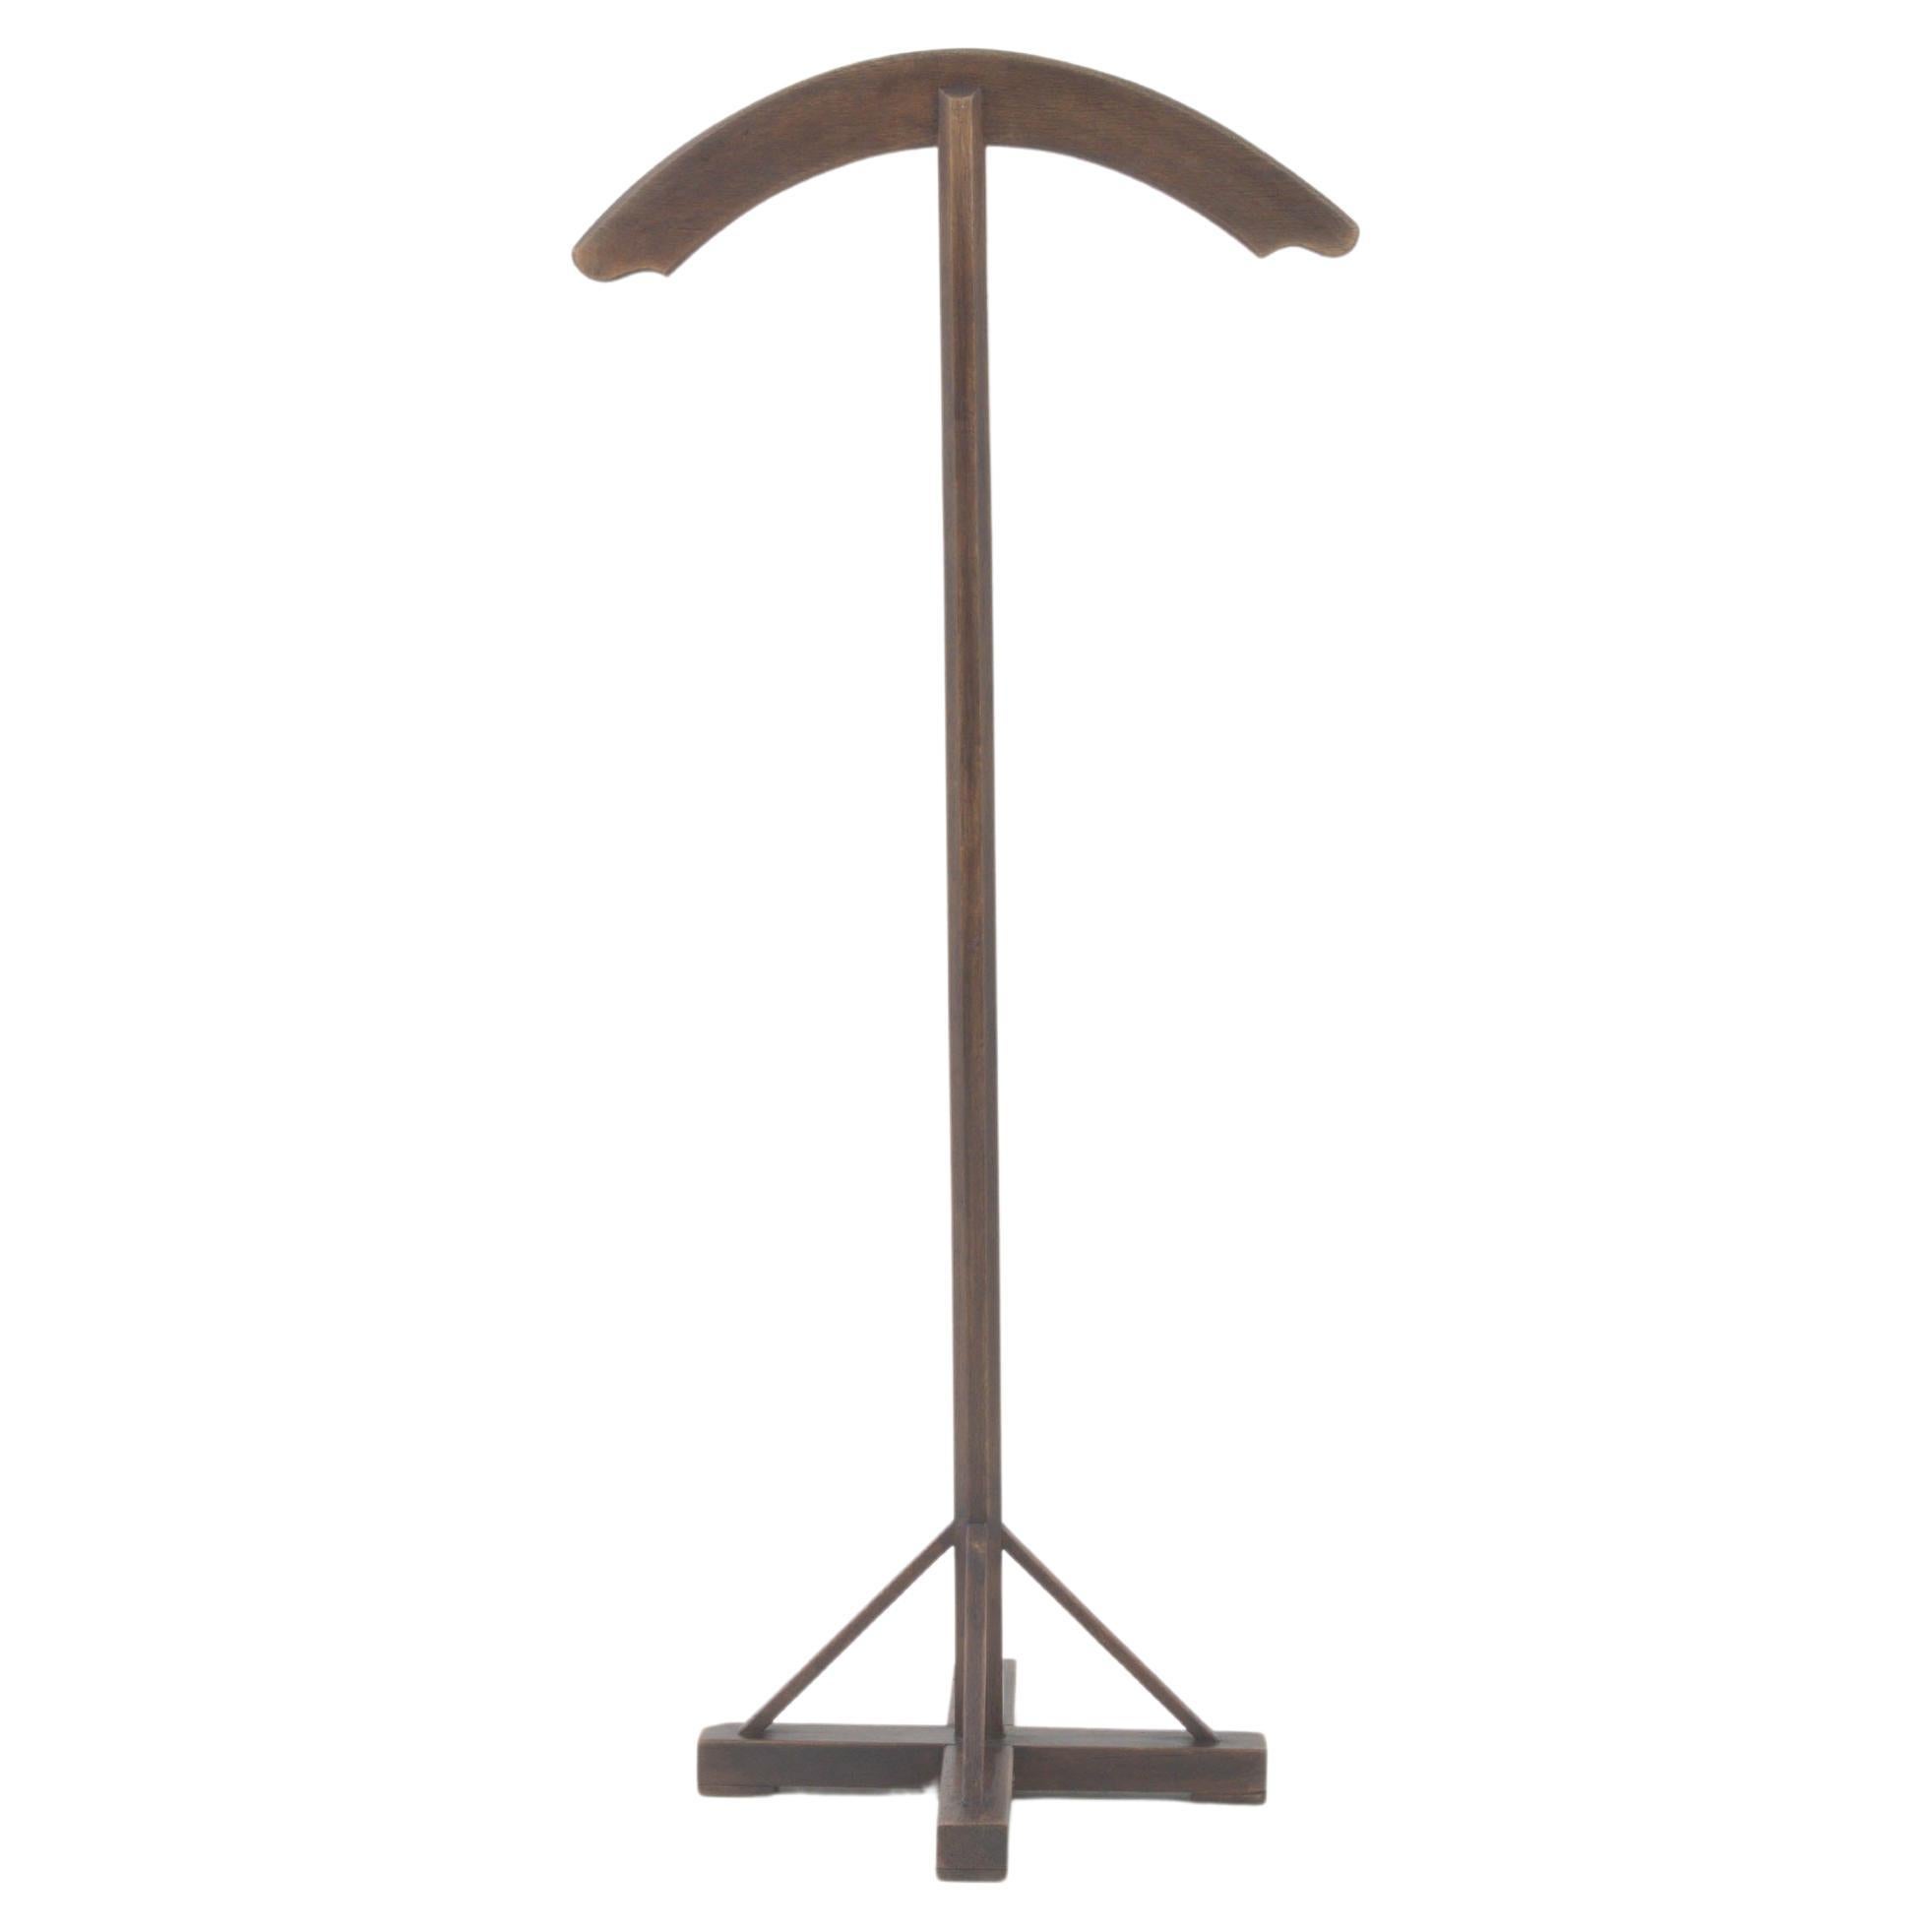 Early 20th Century French Wooden Floor Hanger